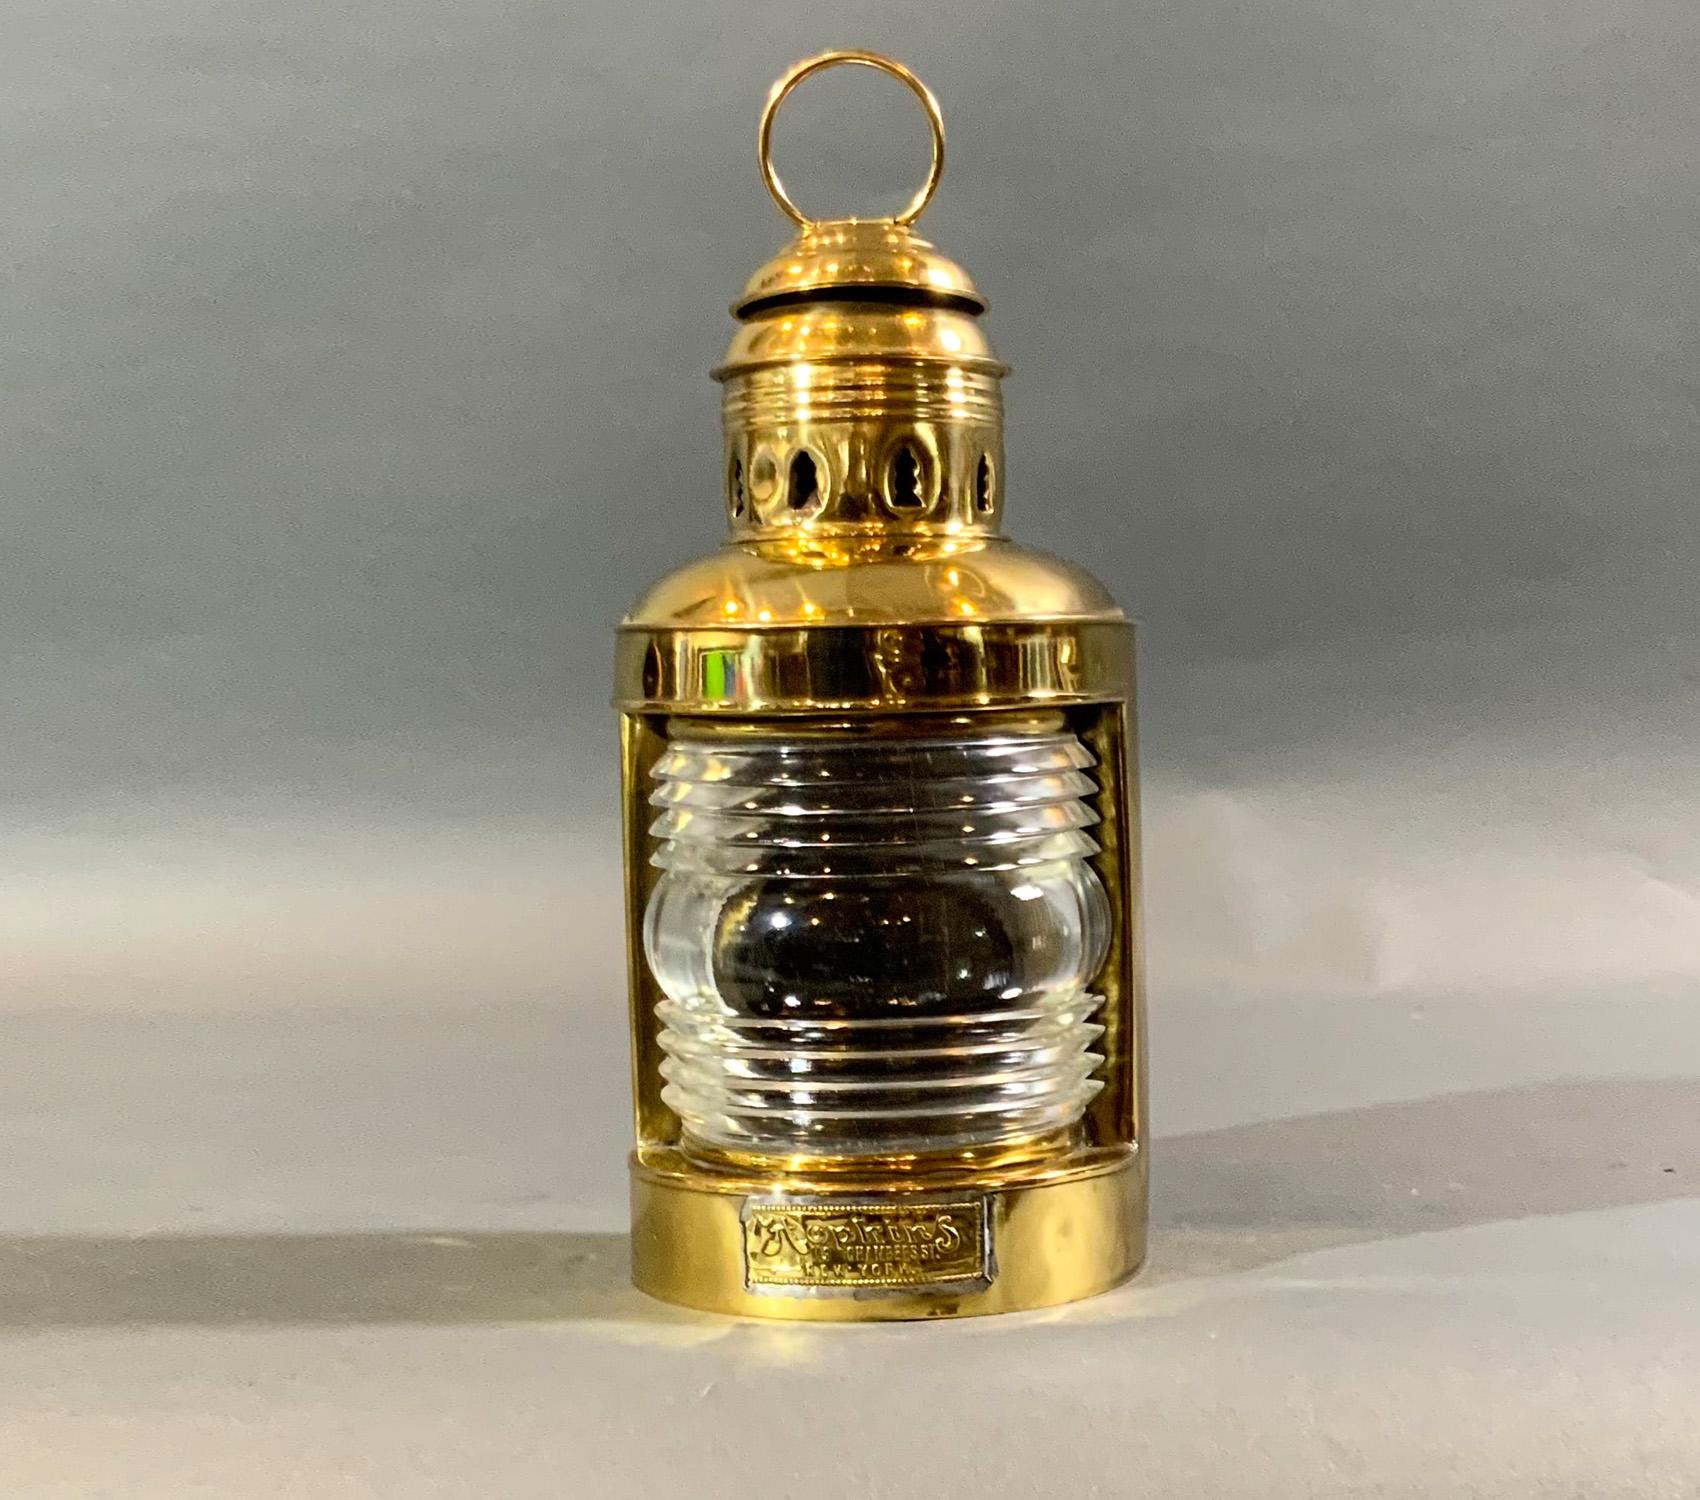 Solid brass ships masthead lantern with makers label from Hopkins of 119 Chambers St New York. With Fresnel glass lens. No burner.

Weight: 2 LBS
Overall dimensions: 11” H x 6